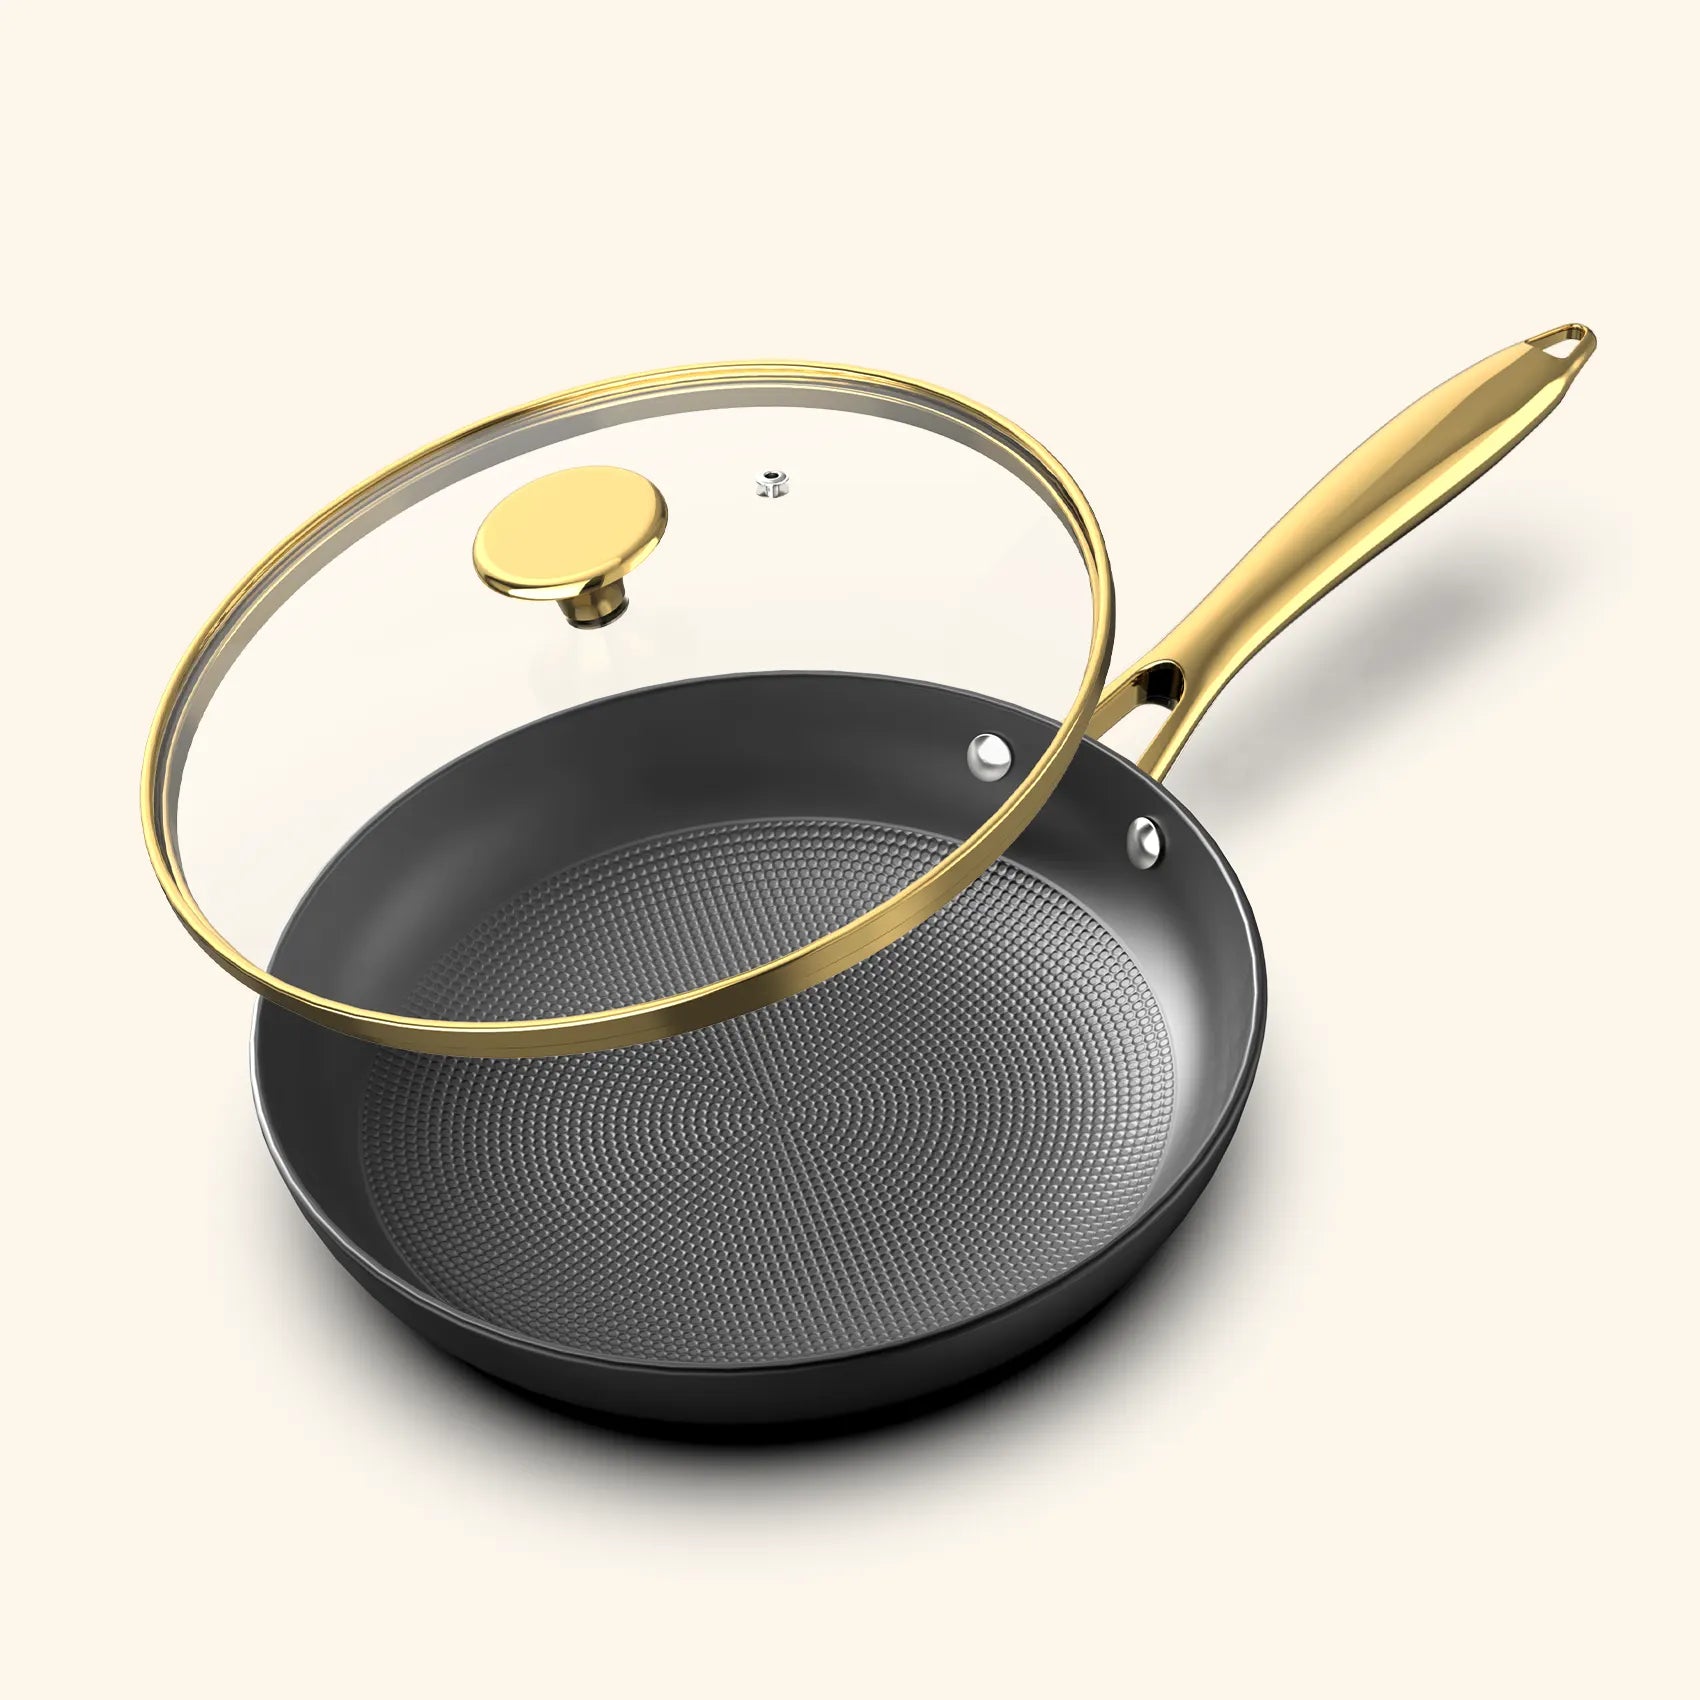 IMARKU Non Stick Frying Pans Review  Cast Iron Skillets 8 10 12 Inch Nonstick  Frying Pan 